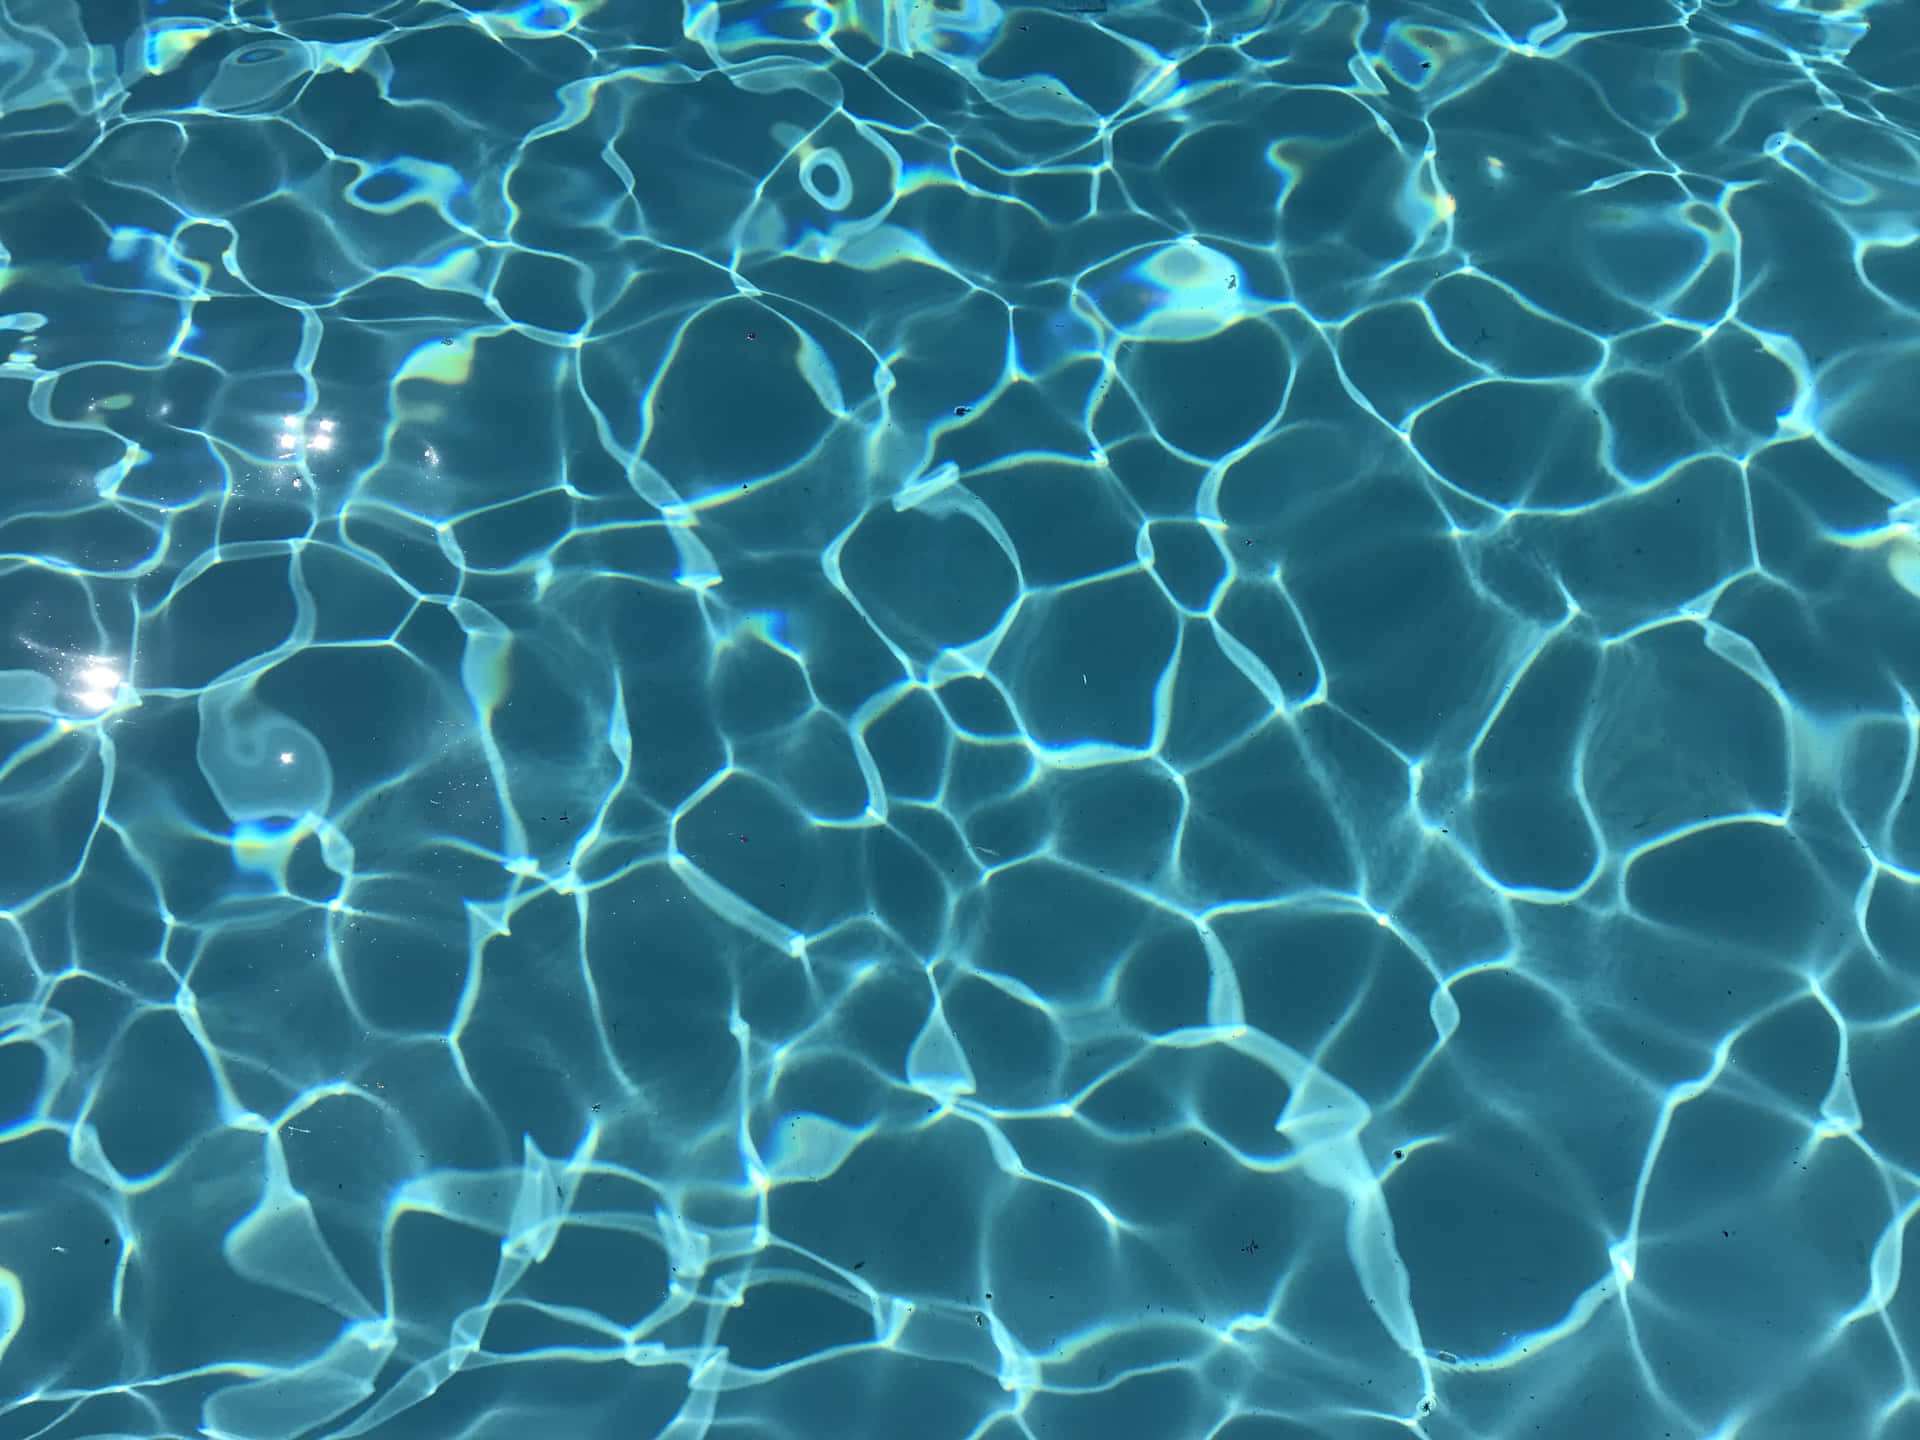 A Close Up Of A Pool With Clear Water